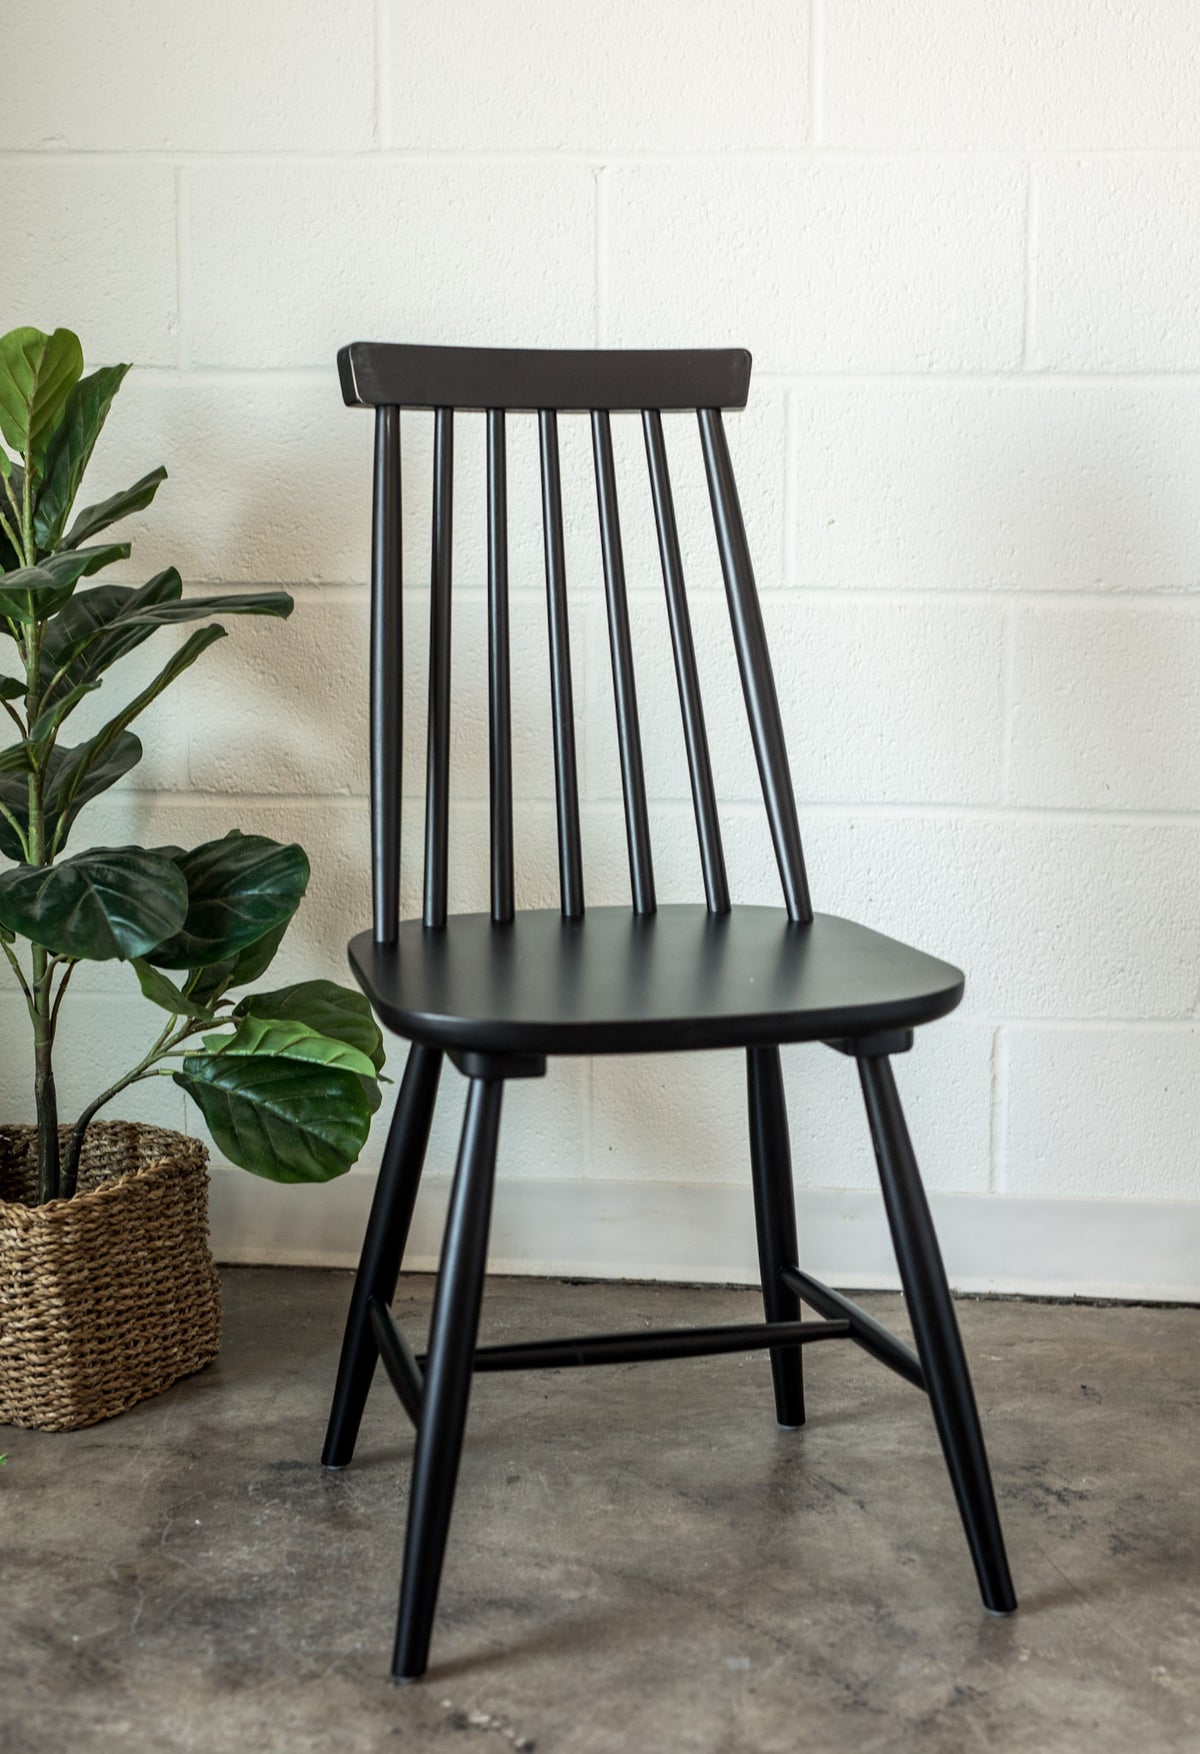 Slatted Rubberwood Dining Chair